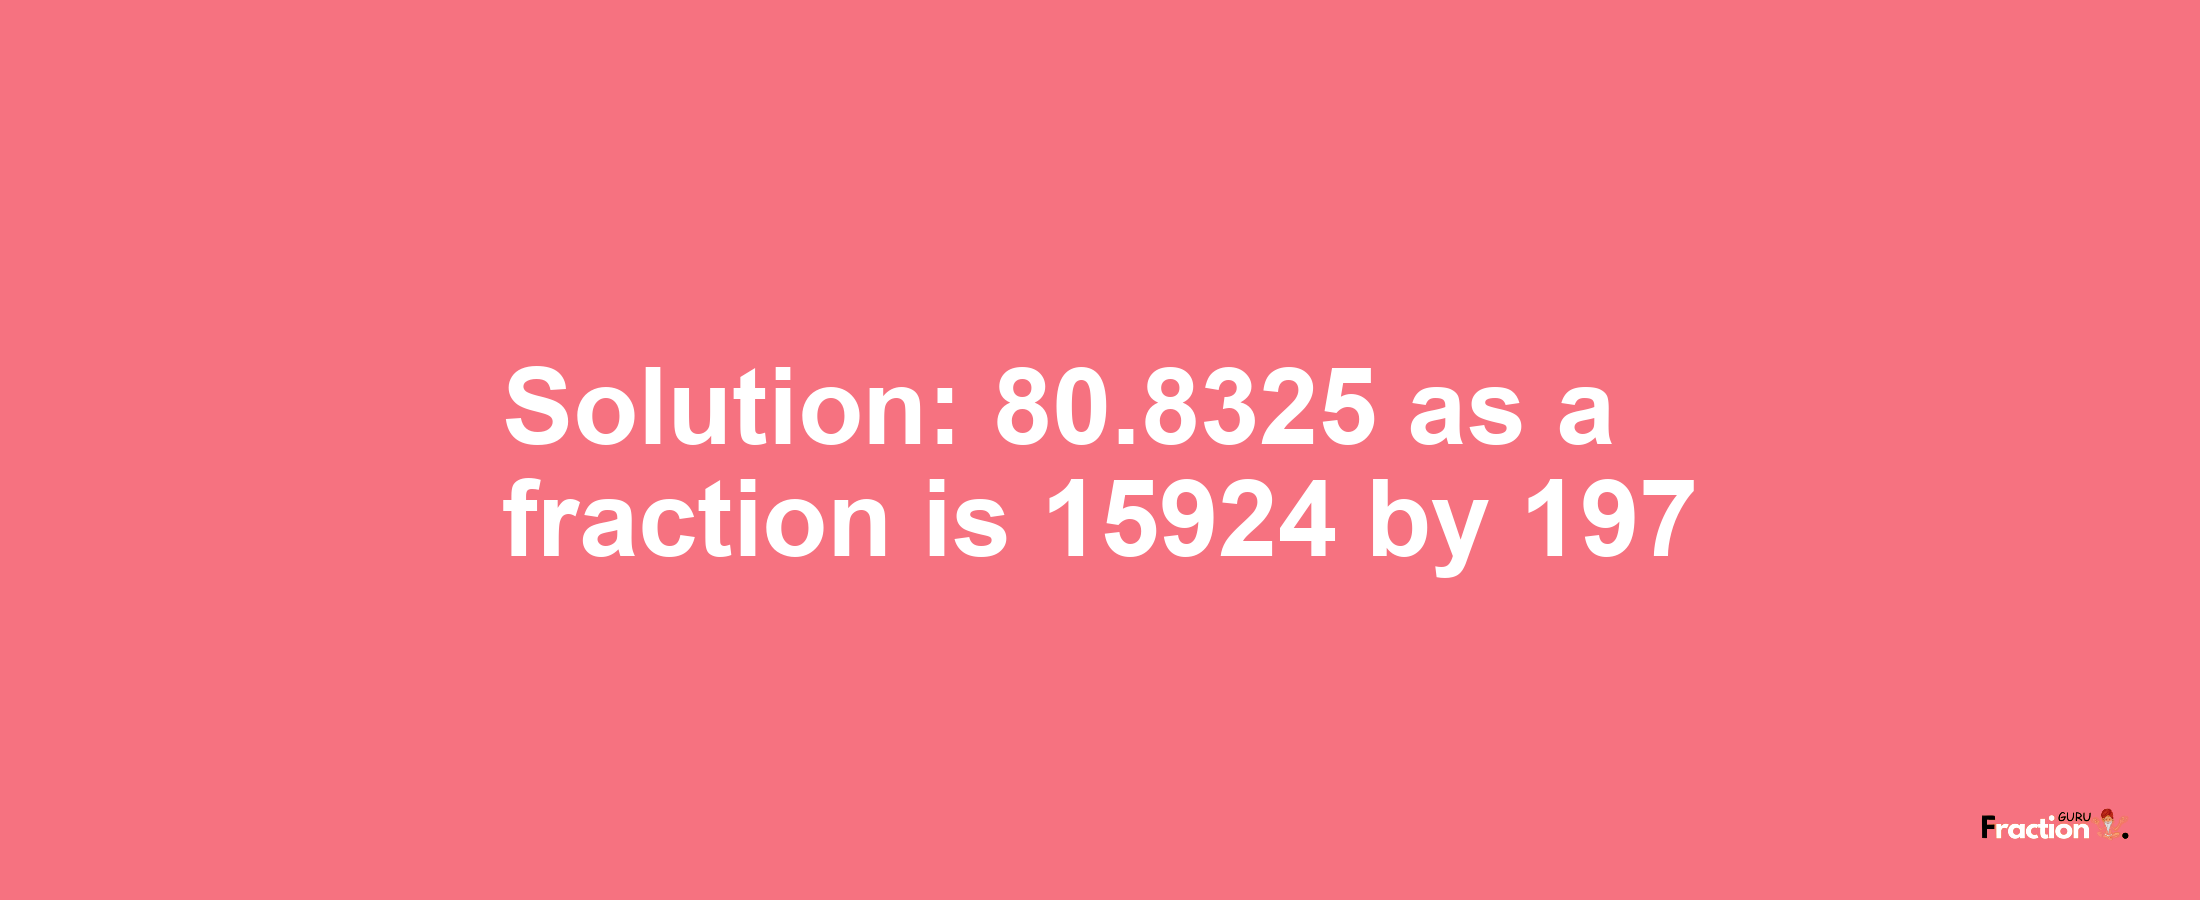 Solution:80.8325 as a fraction is 15924/197